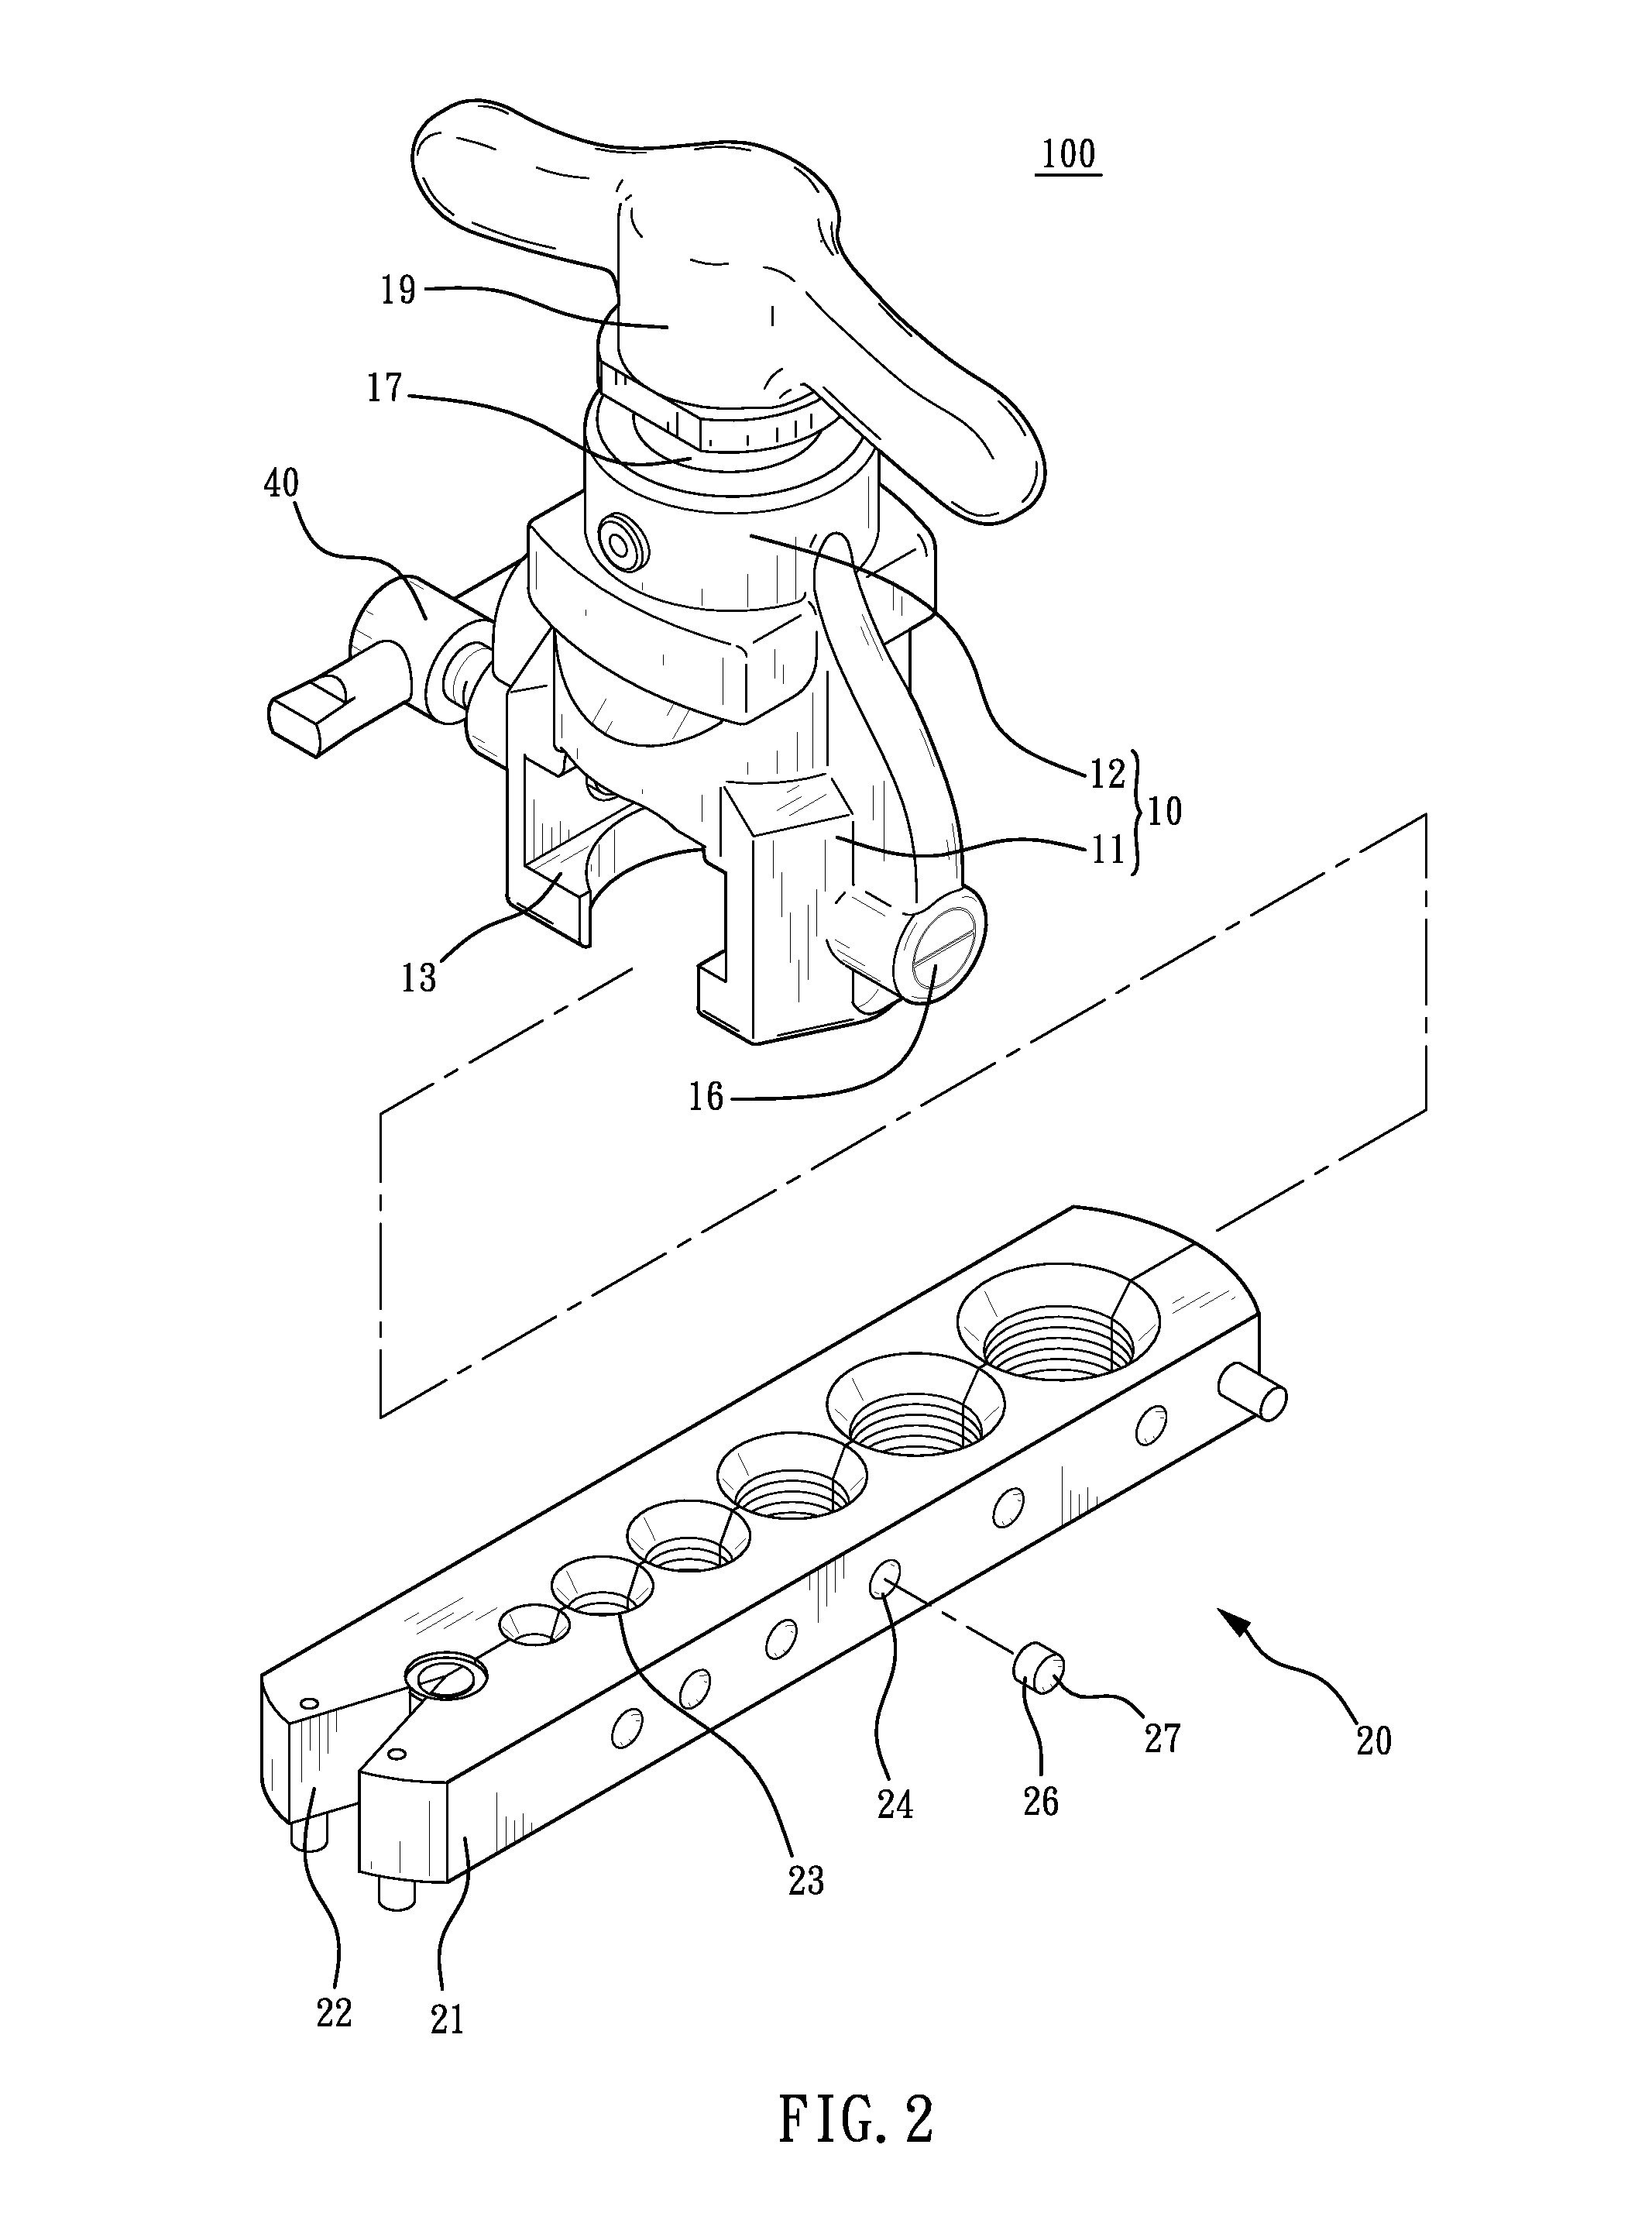 Tube expander with positioning structure